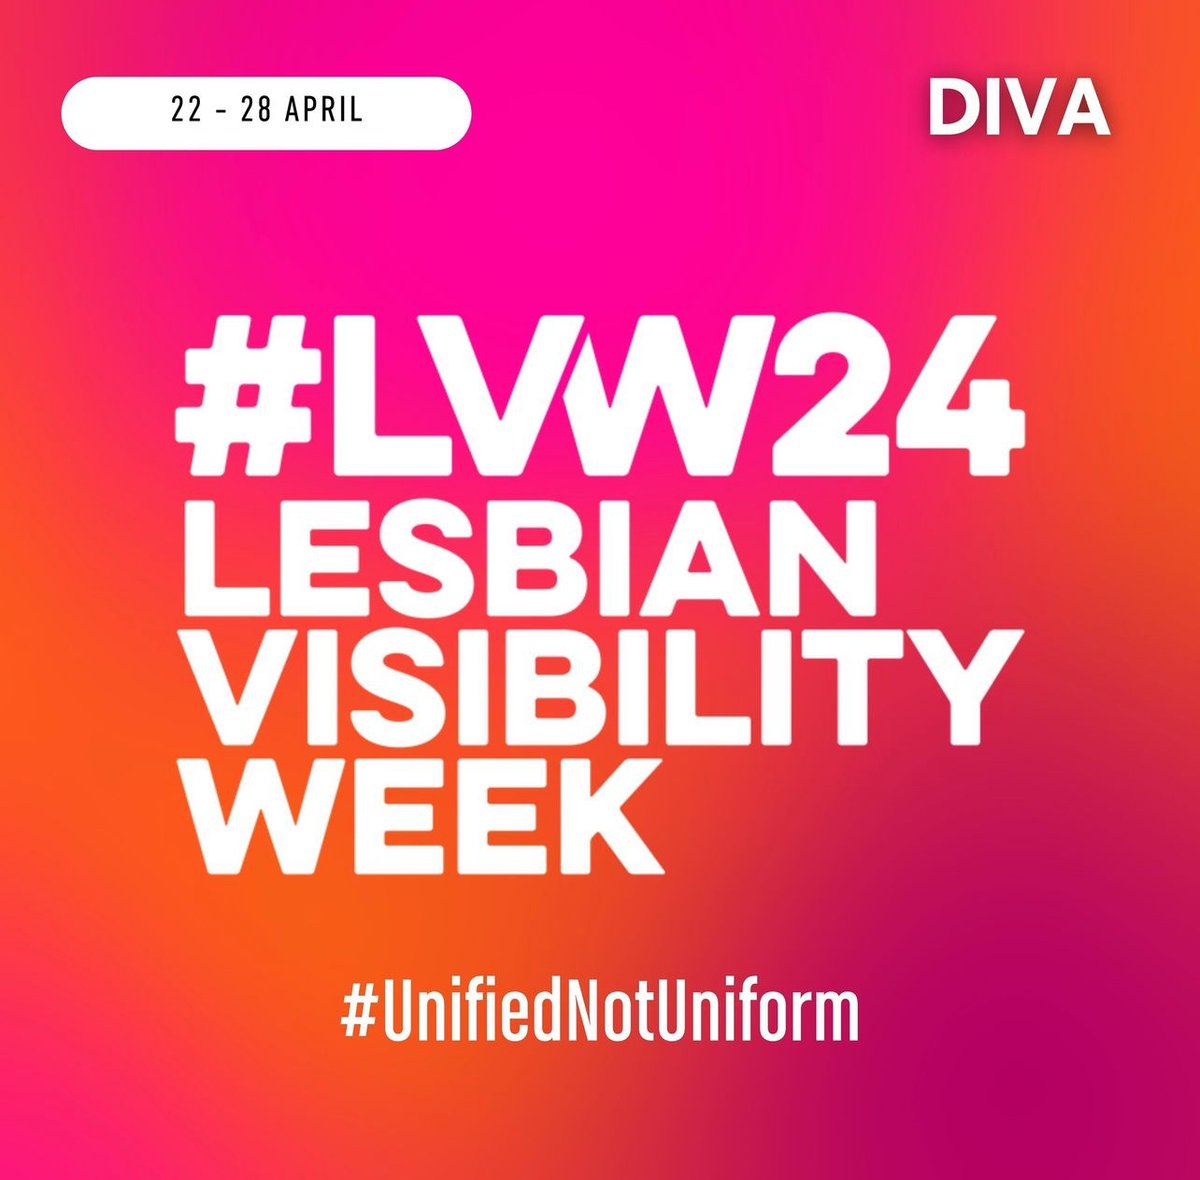 Happy #LVW2024! We have a week's worth of lesbian representation, joy and fierceness ahead! Today at 16:00 CET, our Advocacy Director @ilaria_todde will be speaking at the Lesbian Visibility Week Workplace Conference - Panel Debate. Watch live on youtube: bit.ly/3Q8T9o0